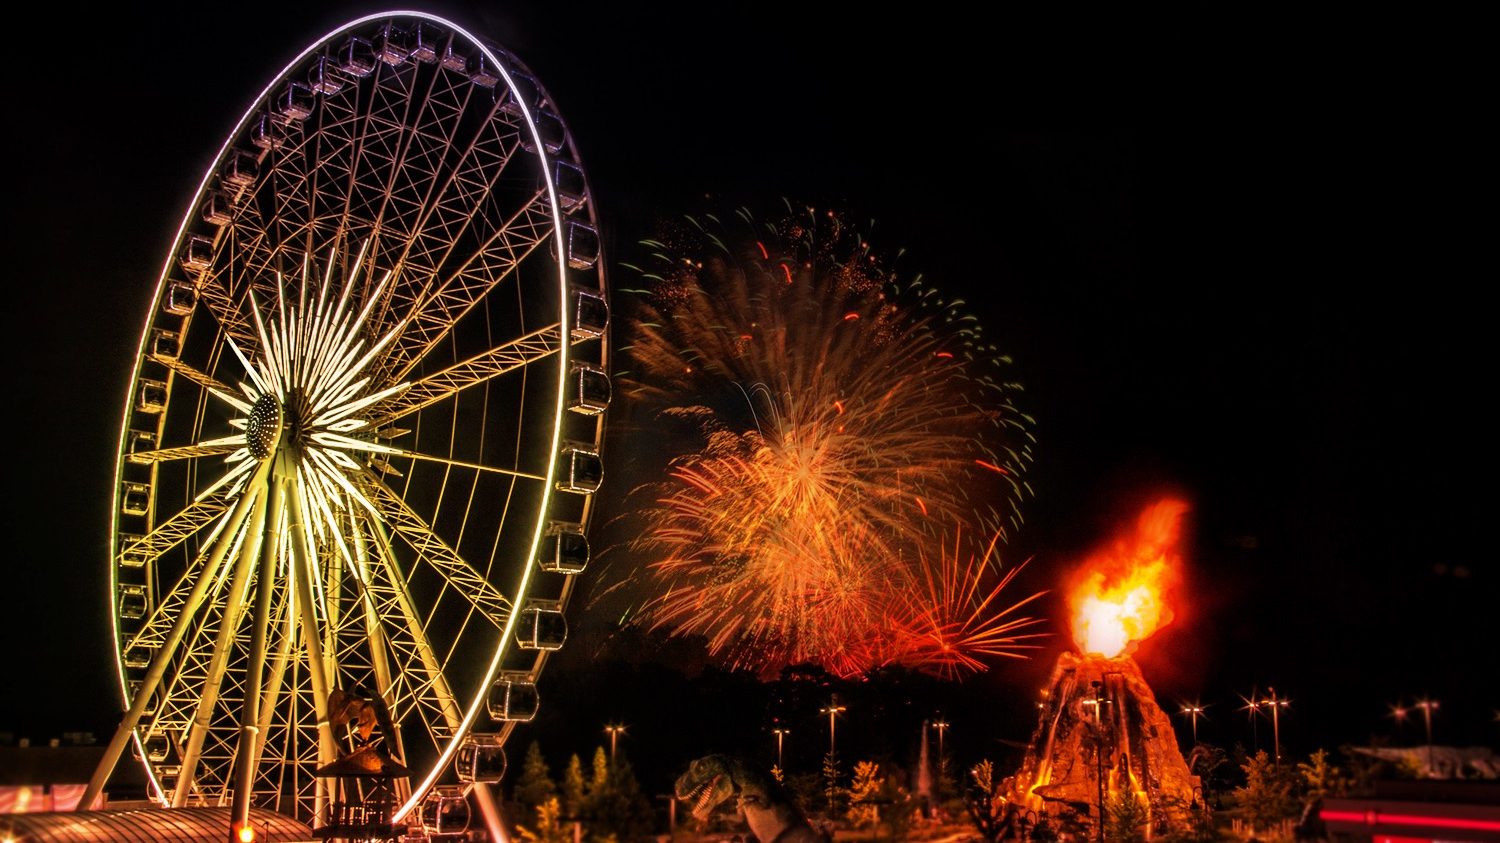 SkyWheel with fireworks in the background